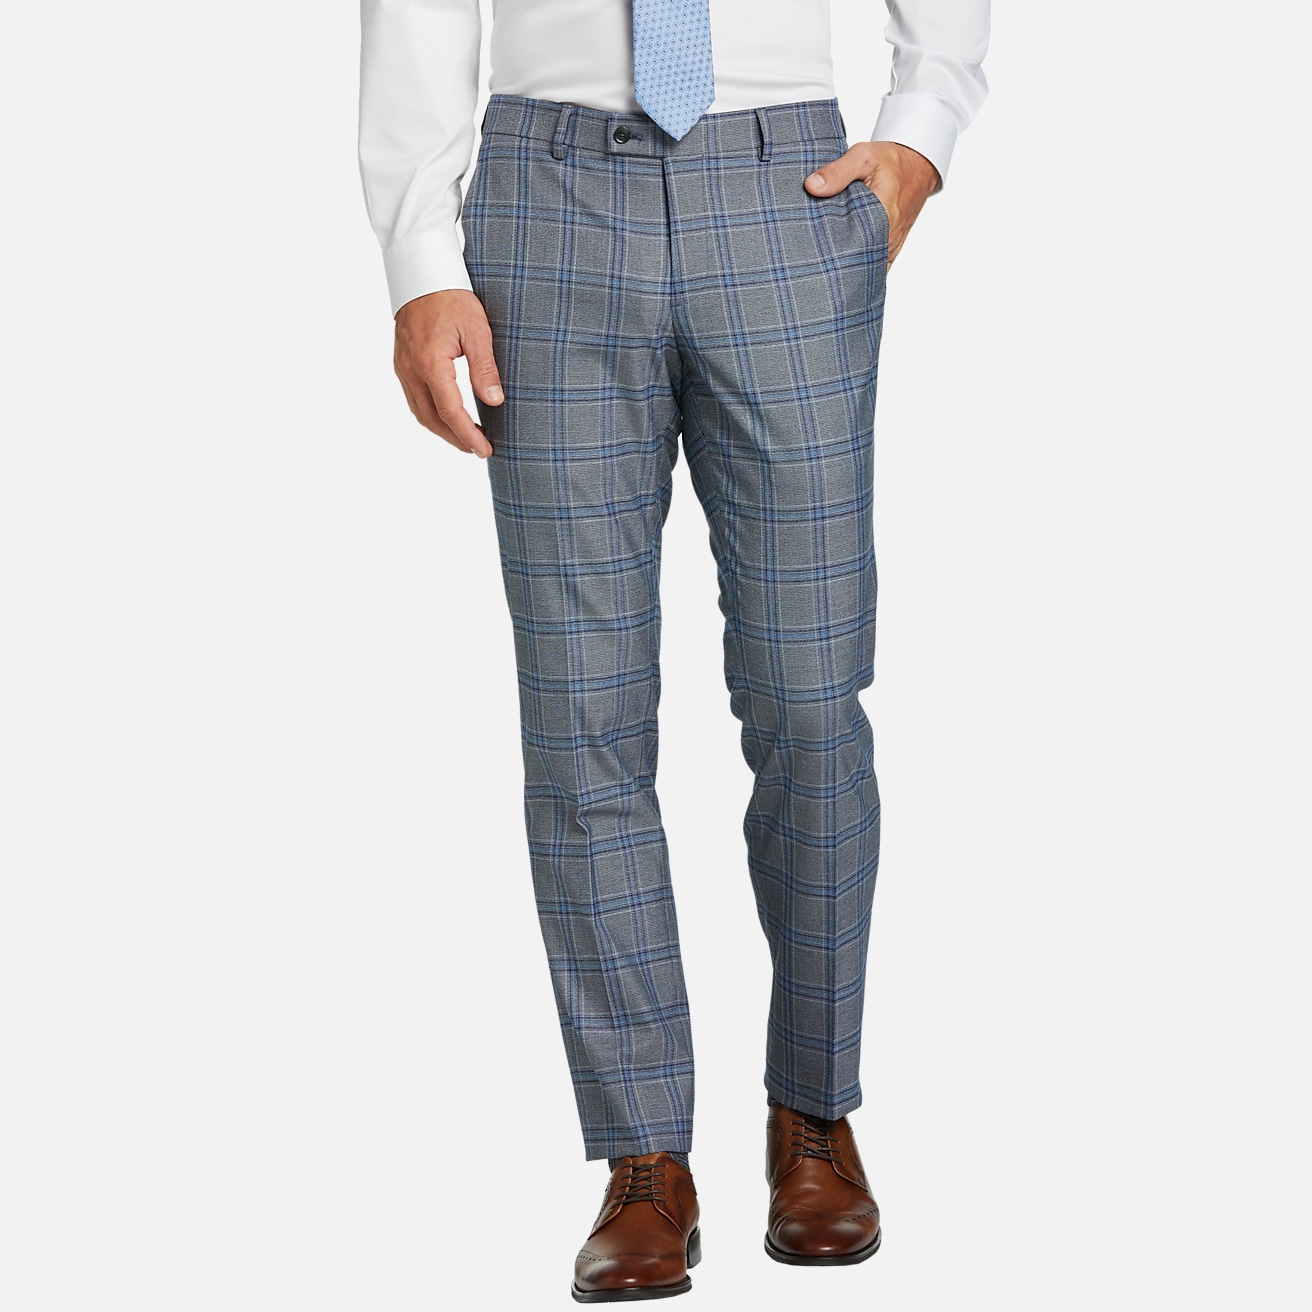 Men's Plaid Dress Pants Casual Slim Fit Checkered Business Trousers White  30 